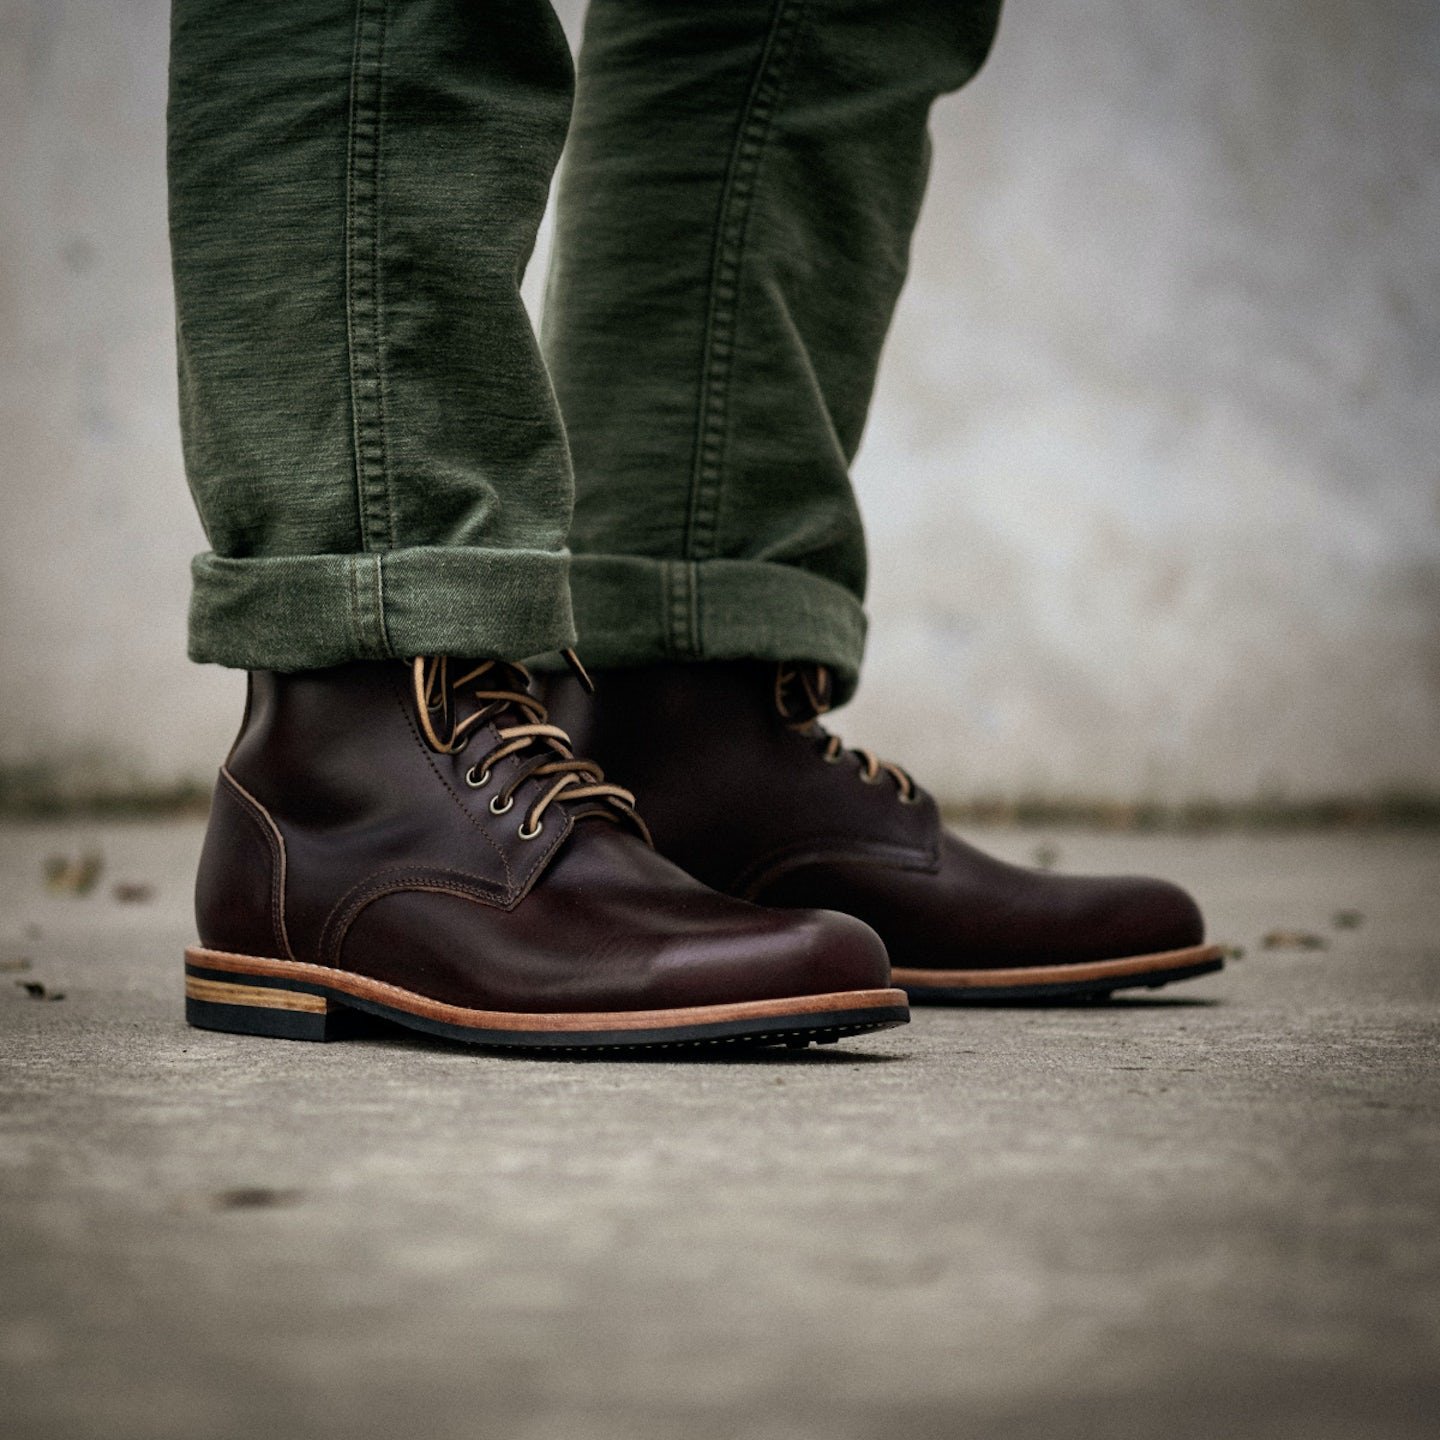 oak-street-bootmakers-trench-boot-color-8-chromexcel-dainite-sole-7_15_1.jpeg